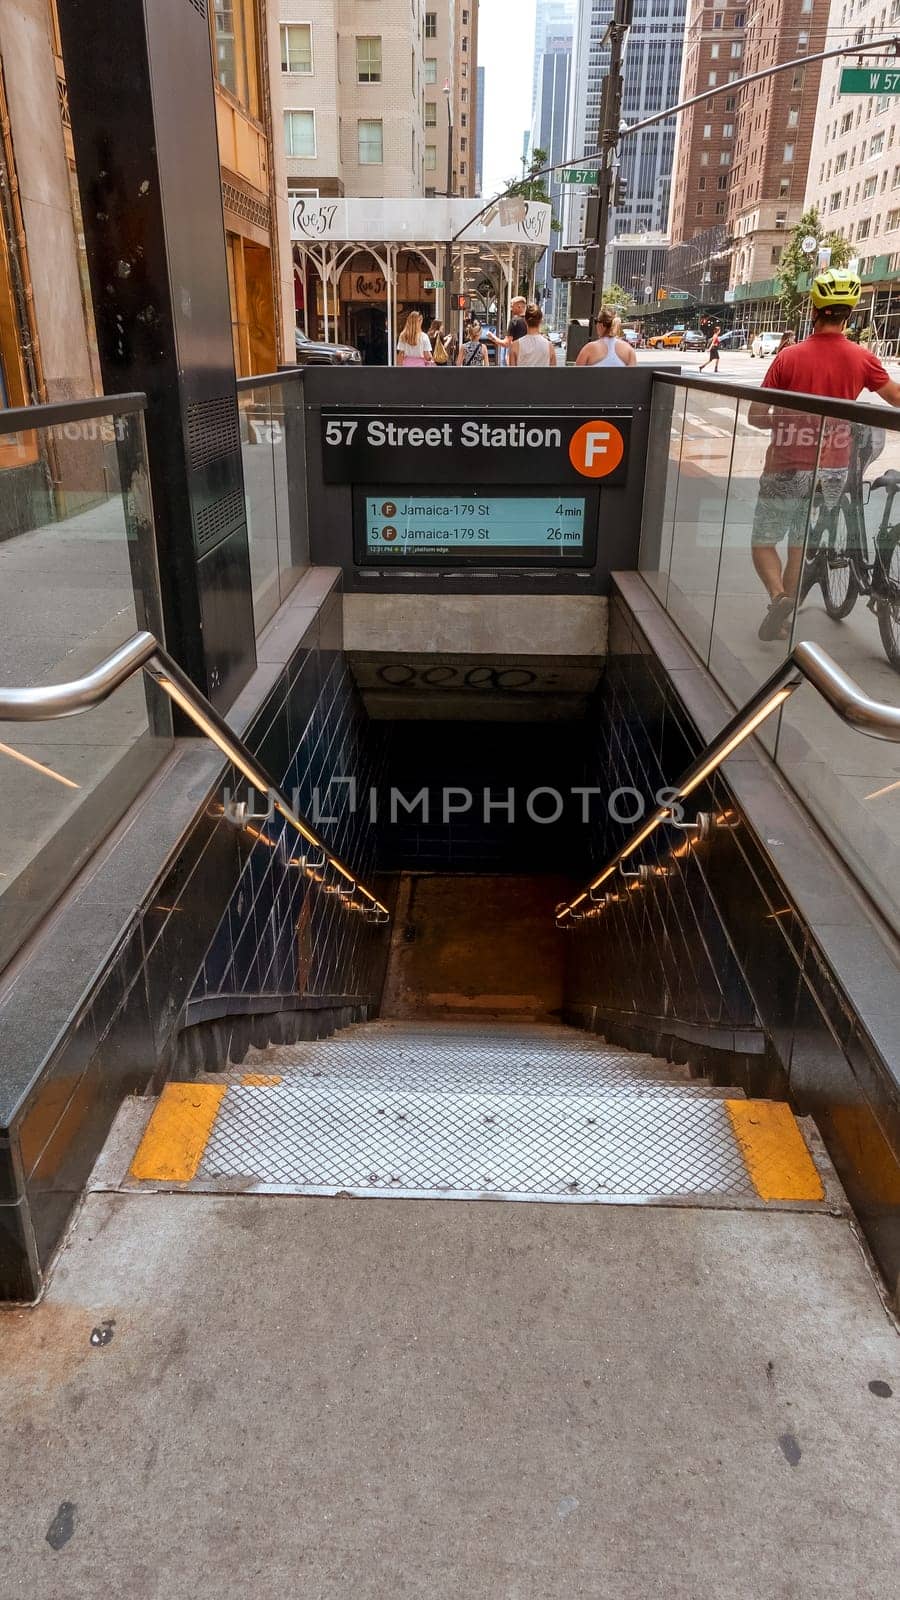 Entrance and stairs down to subway station in New York. New York City Subway is one of the world's oldest public transit systems. New York, USA - July 15, 2023 by JuliaDorian